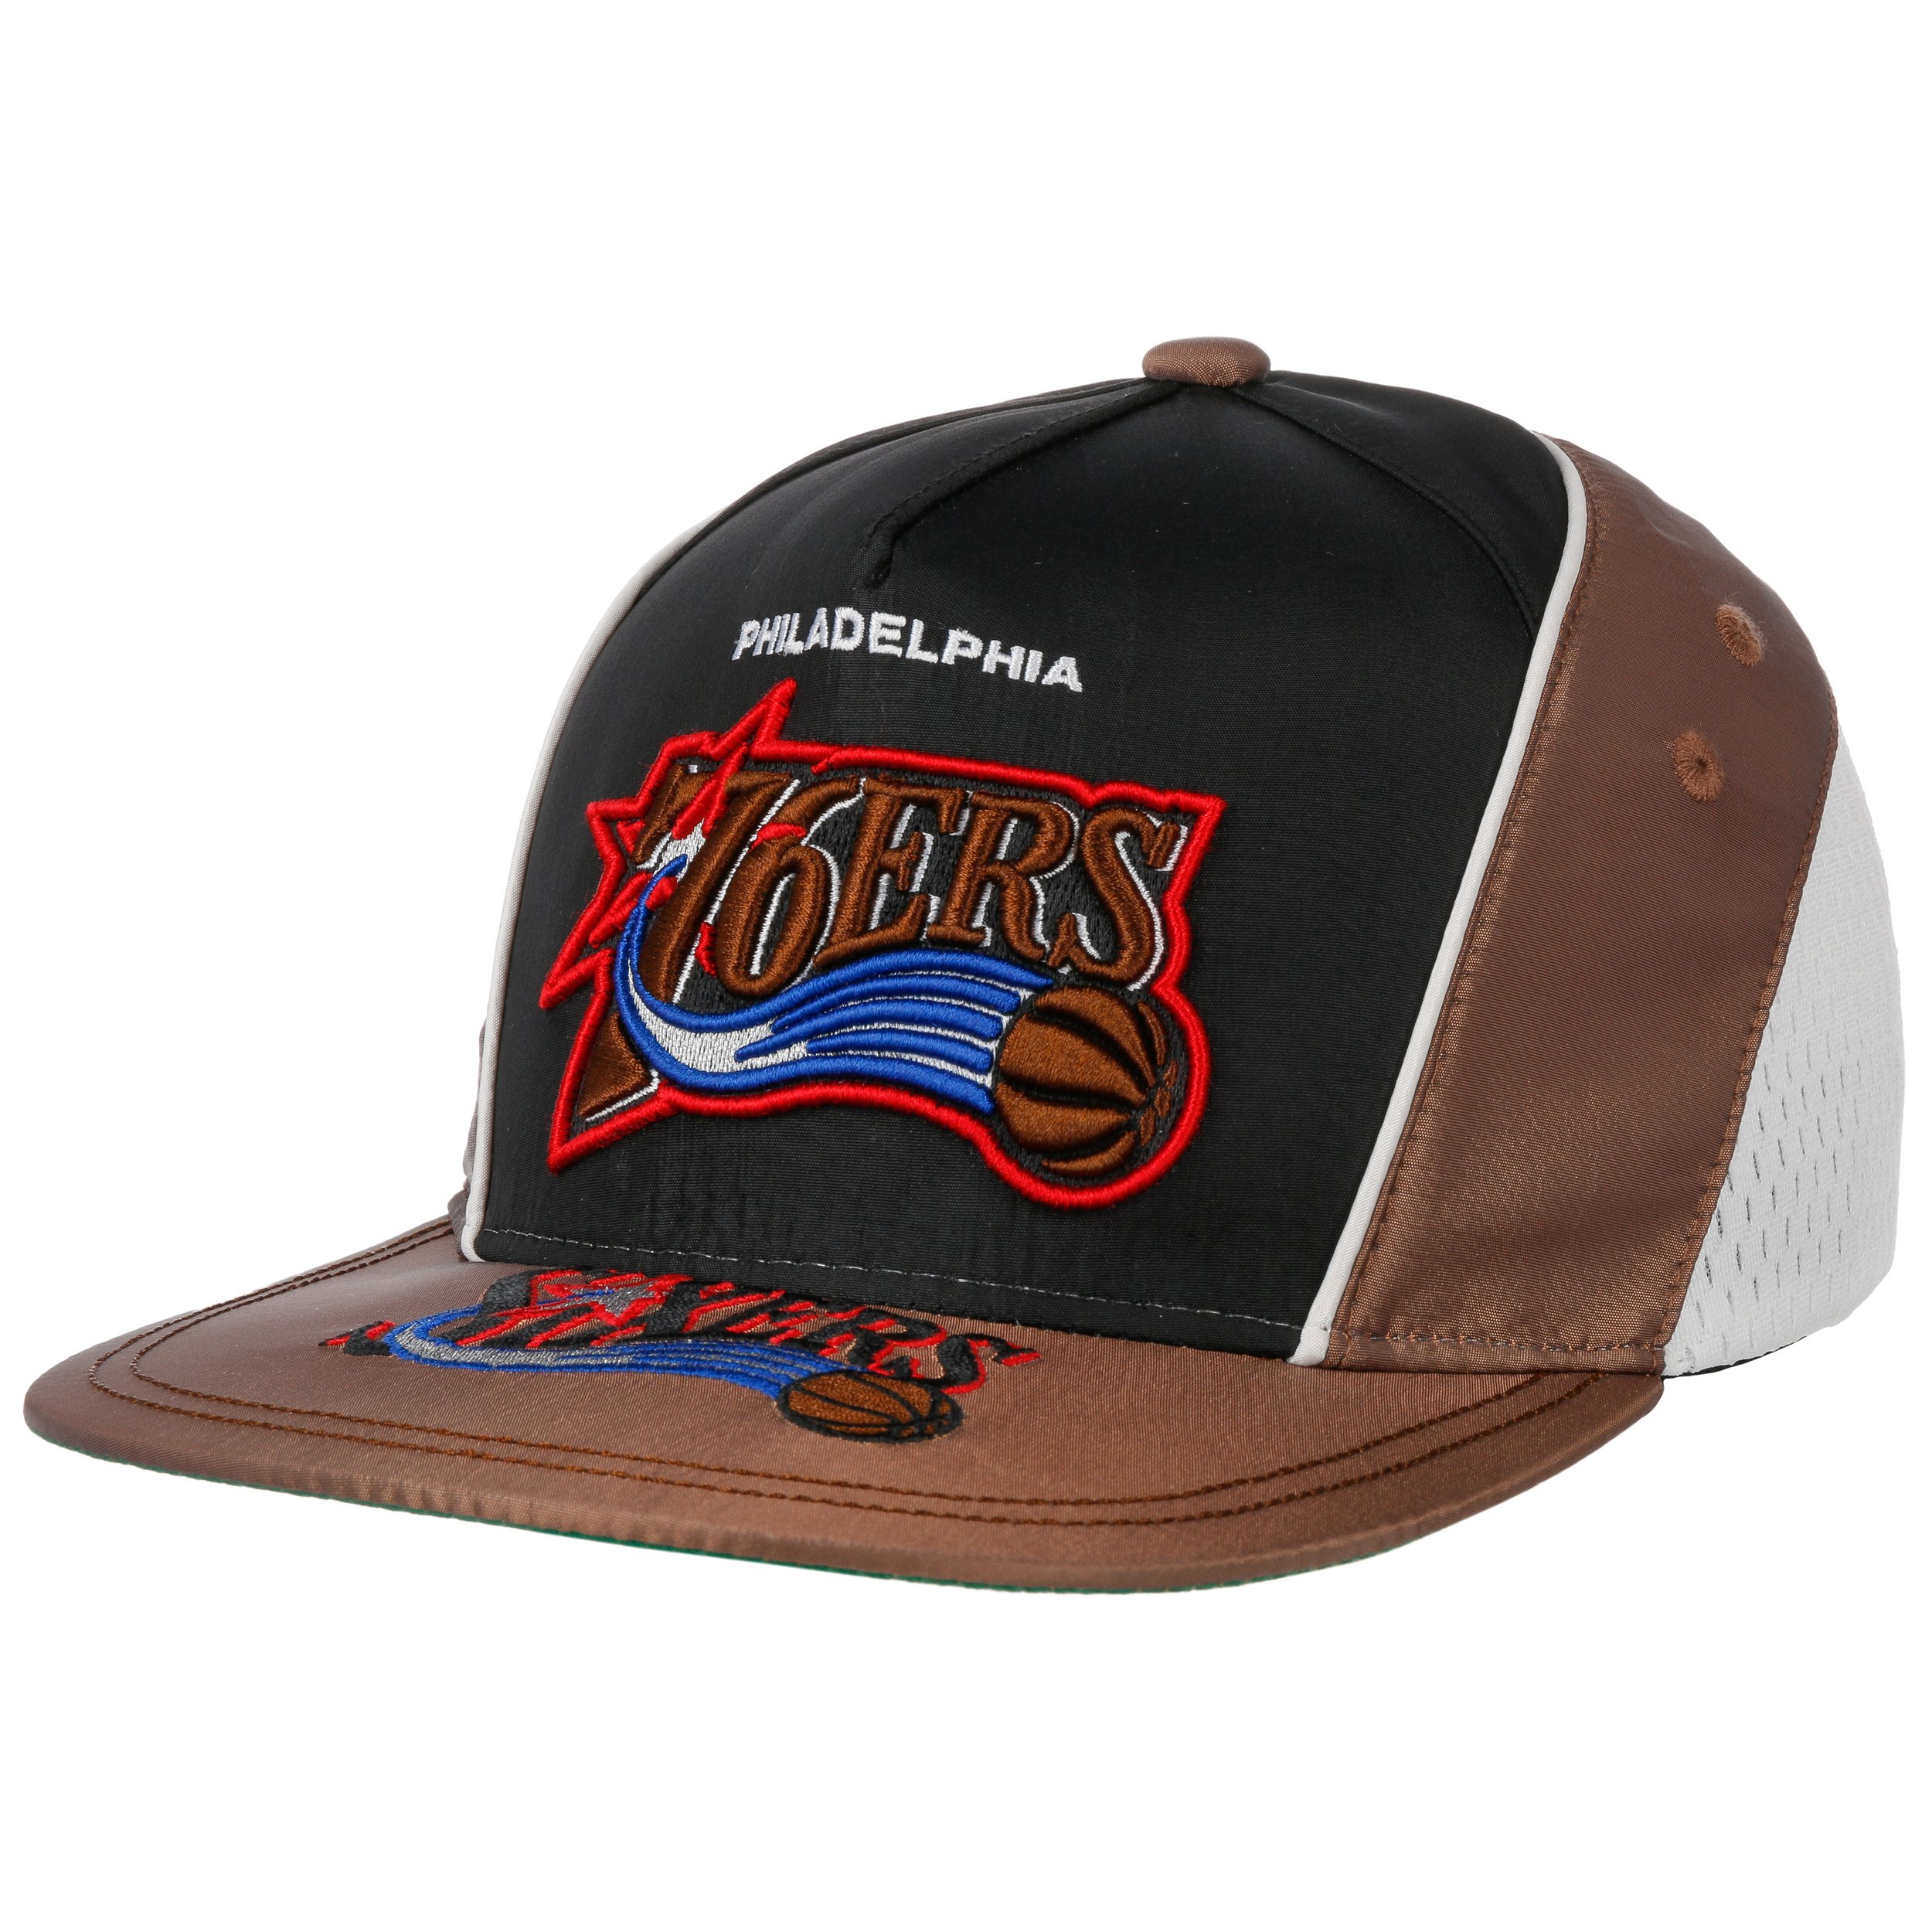 Freethrow Snap 76ers Cap by Mitchell & Ness